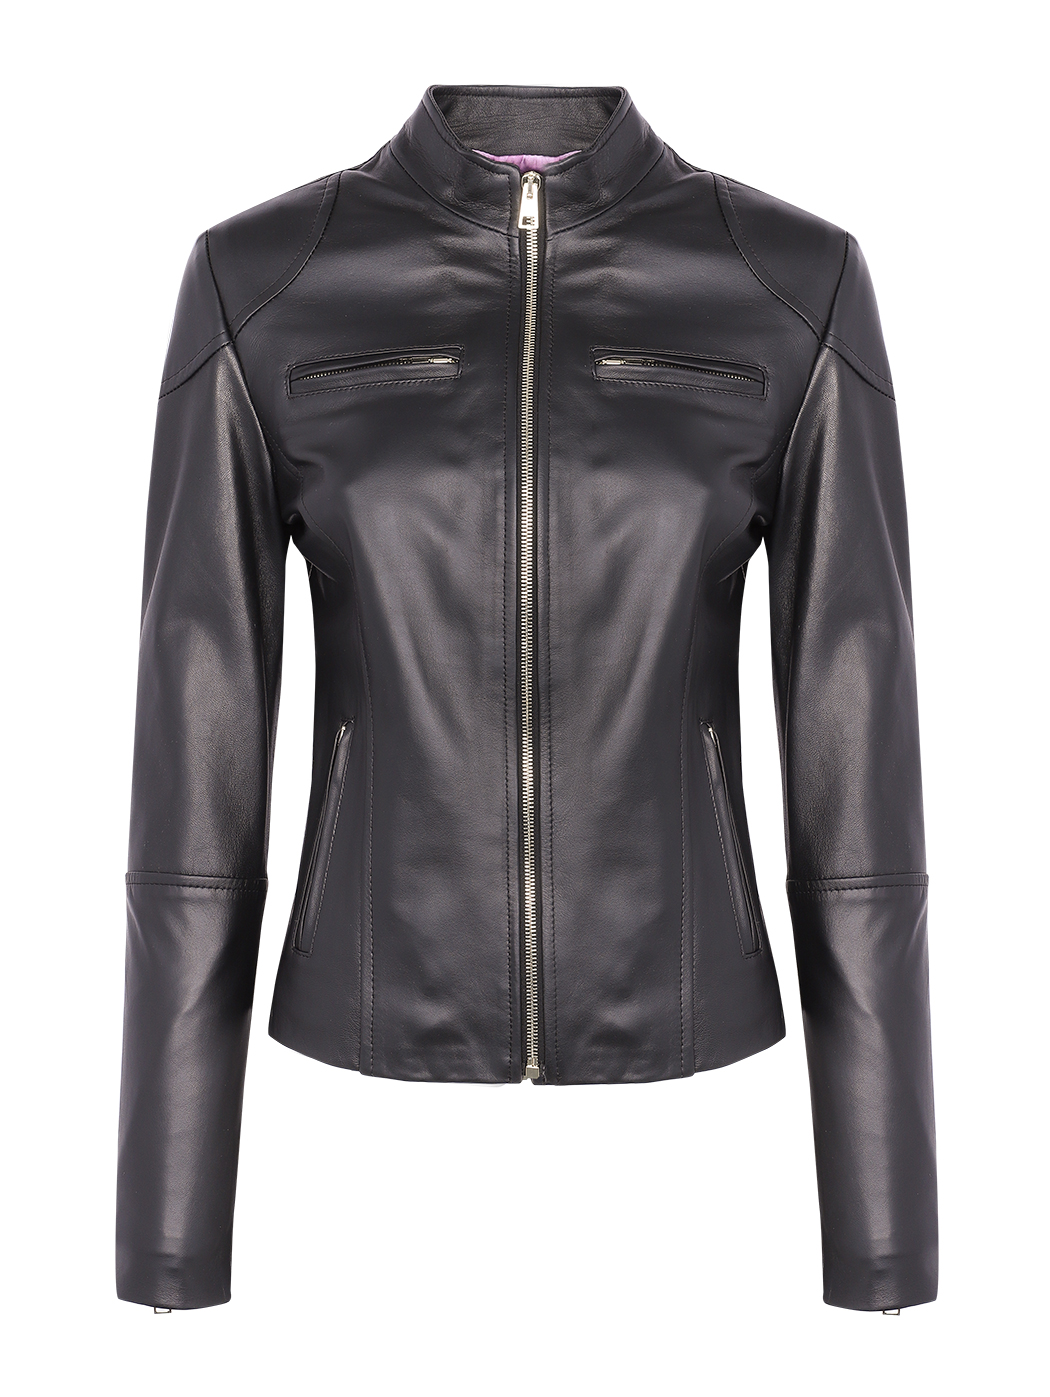 Short black leather jacket with front pockets